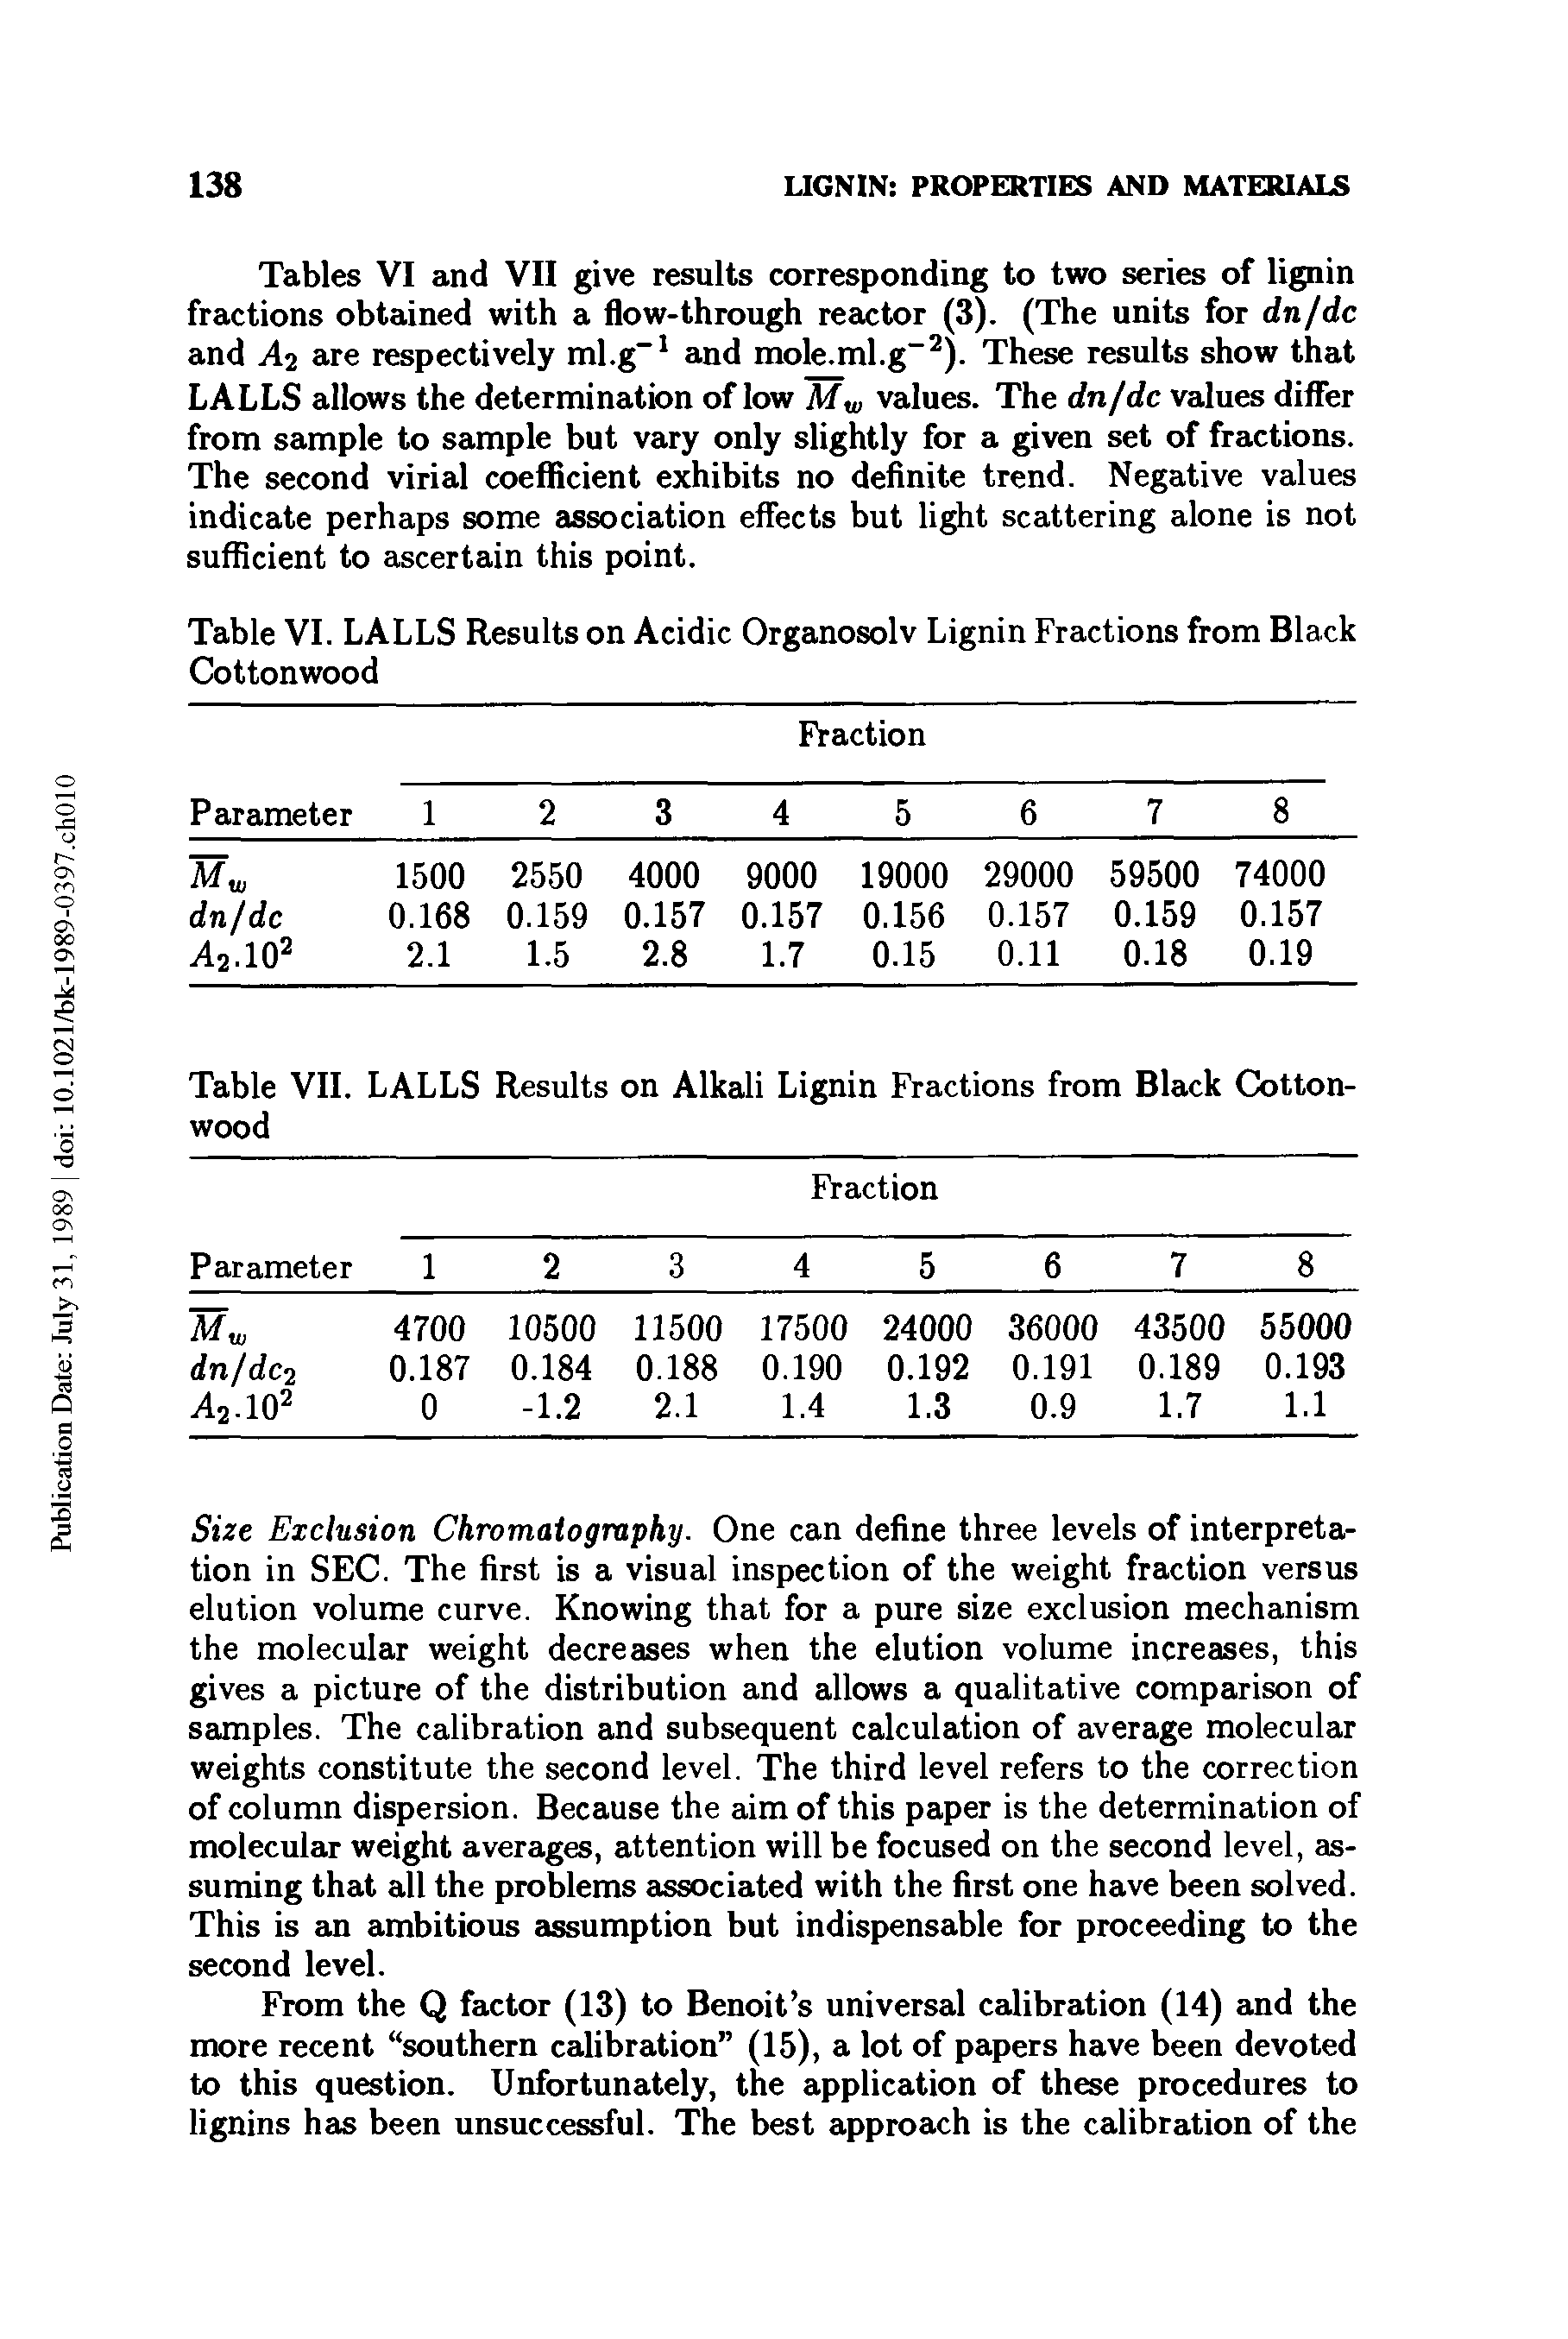 Tables VI and VII give results corresponding to two series of lignin fractions obtained with a flow-through reactor (3). (The units for dn/dc and A2 are respectively ml.g-1 and mole.ml.g-2). These results show that LALLS allows the determination of low Mw values. The dn/dc values differ from sample to sample but vary only slightly for a given set of fractions. The second virial coefficient exhibits no definite trend. Negative values indicate perhaps some association effects but light scattering alone is not sufficient to ascertain this point.